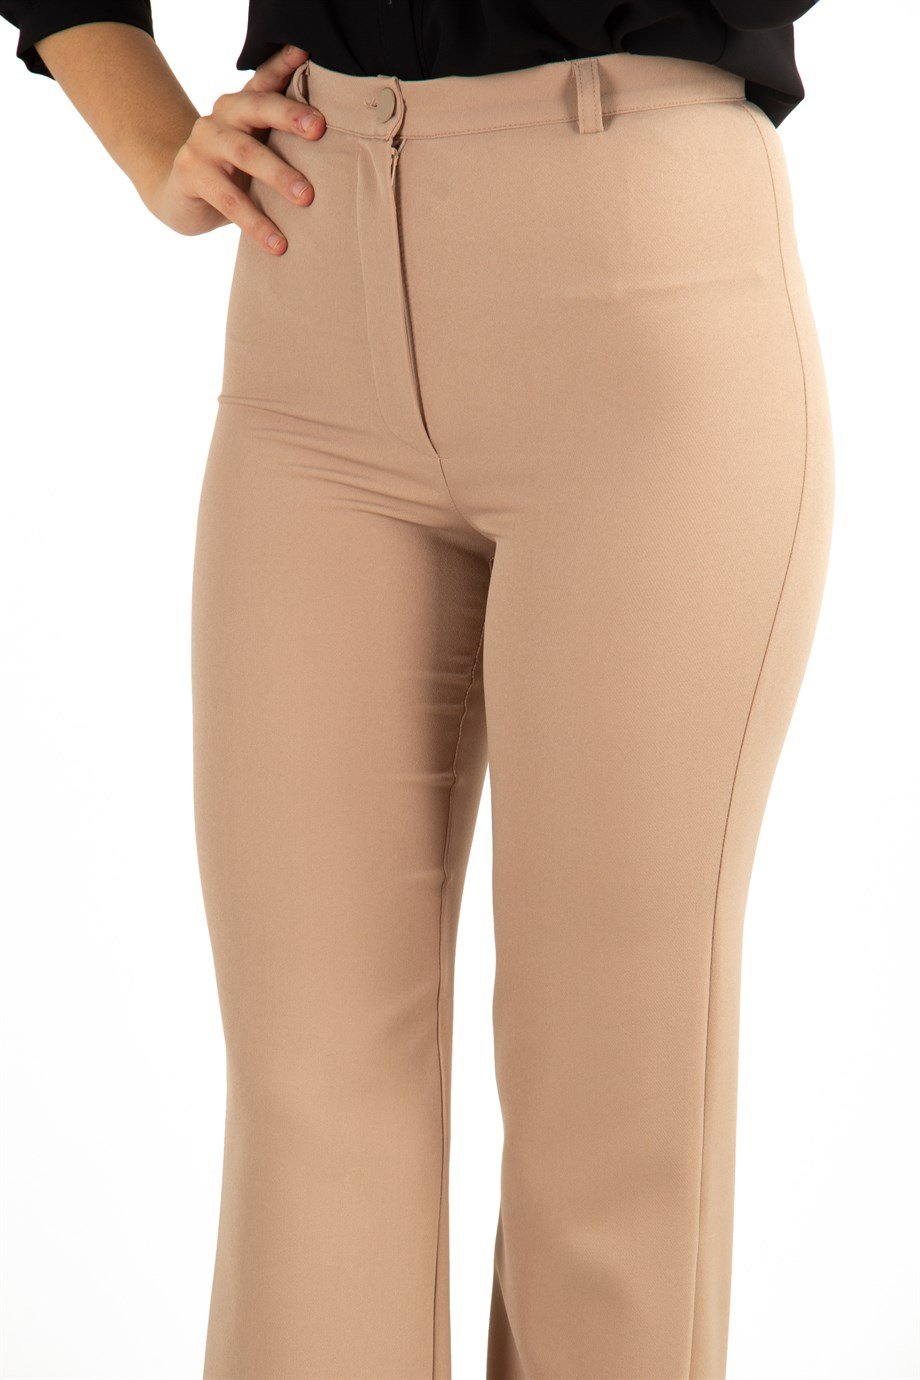 Classic Pants Office Trousers - Beige - Wholesale Womens Clothing